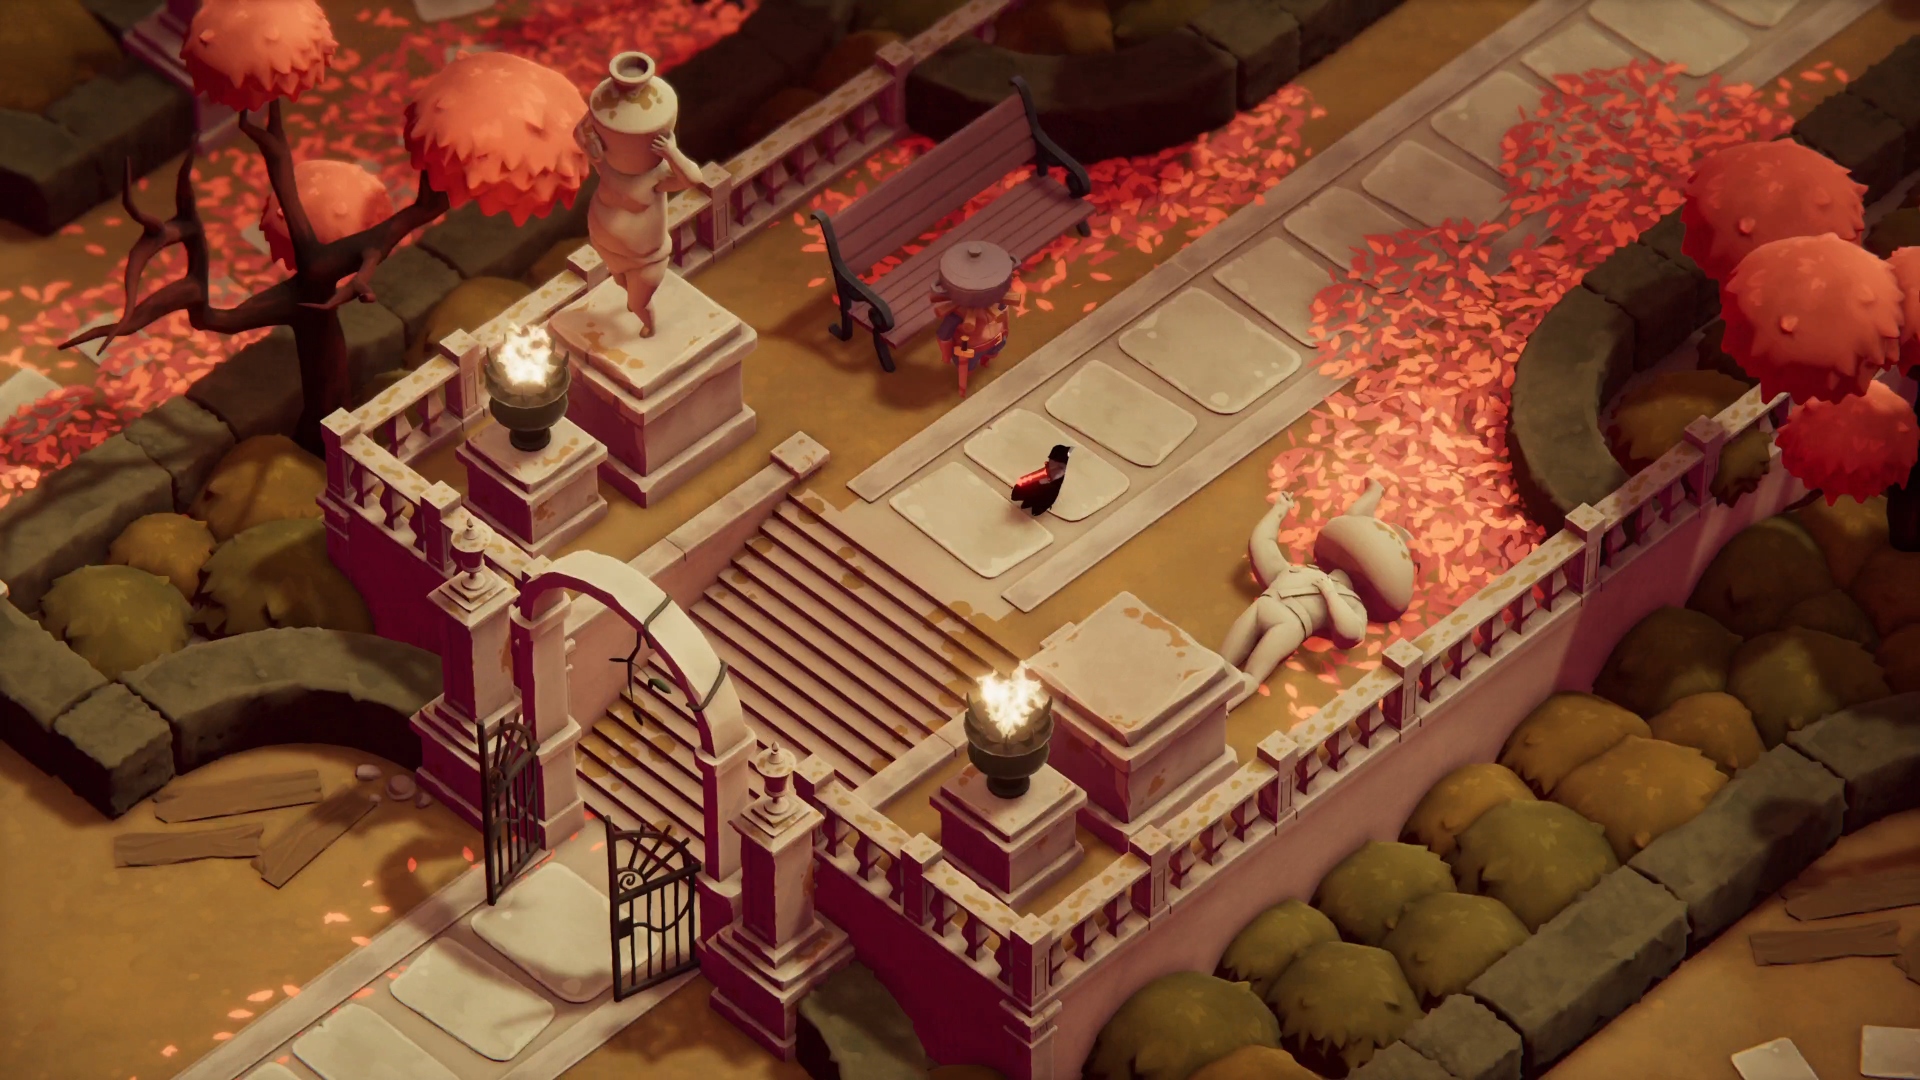 Best indie games: Death's Door. Image shows a crow standing in a park in autumn.